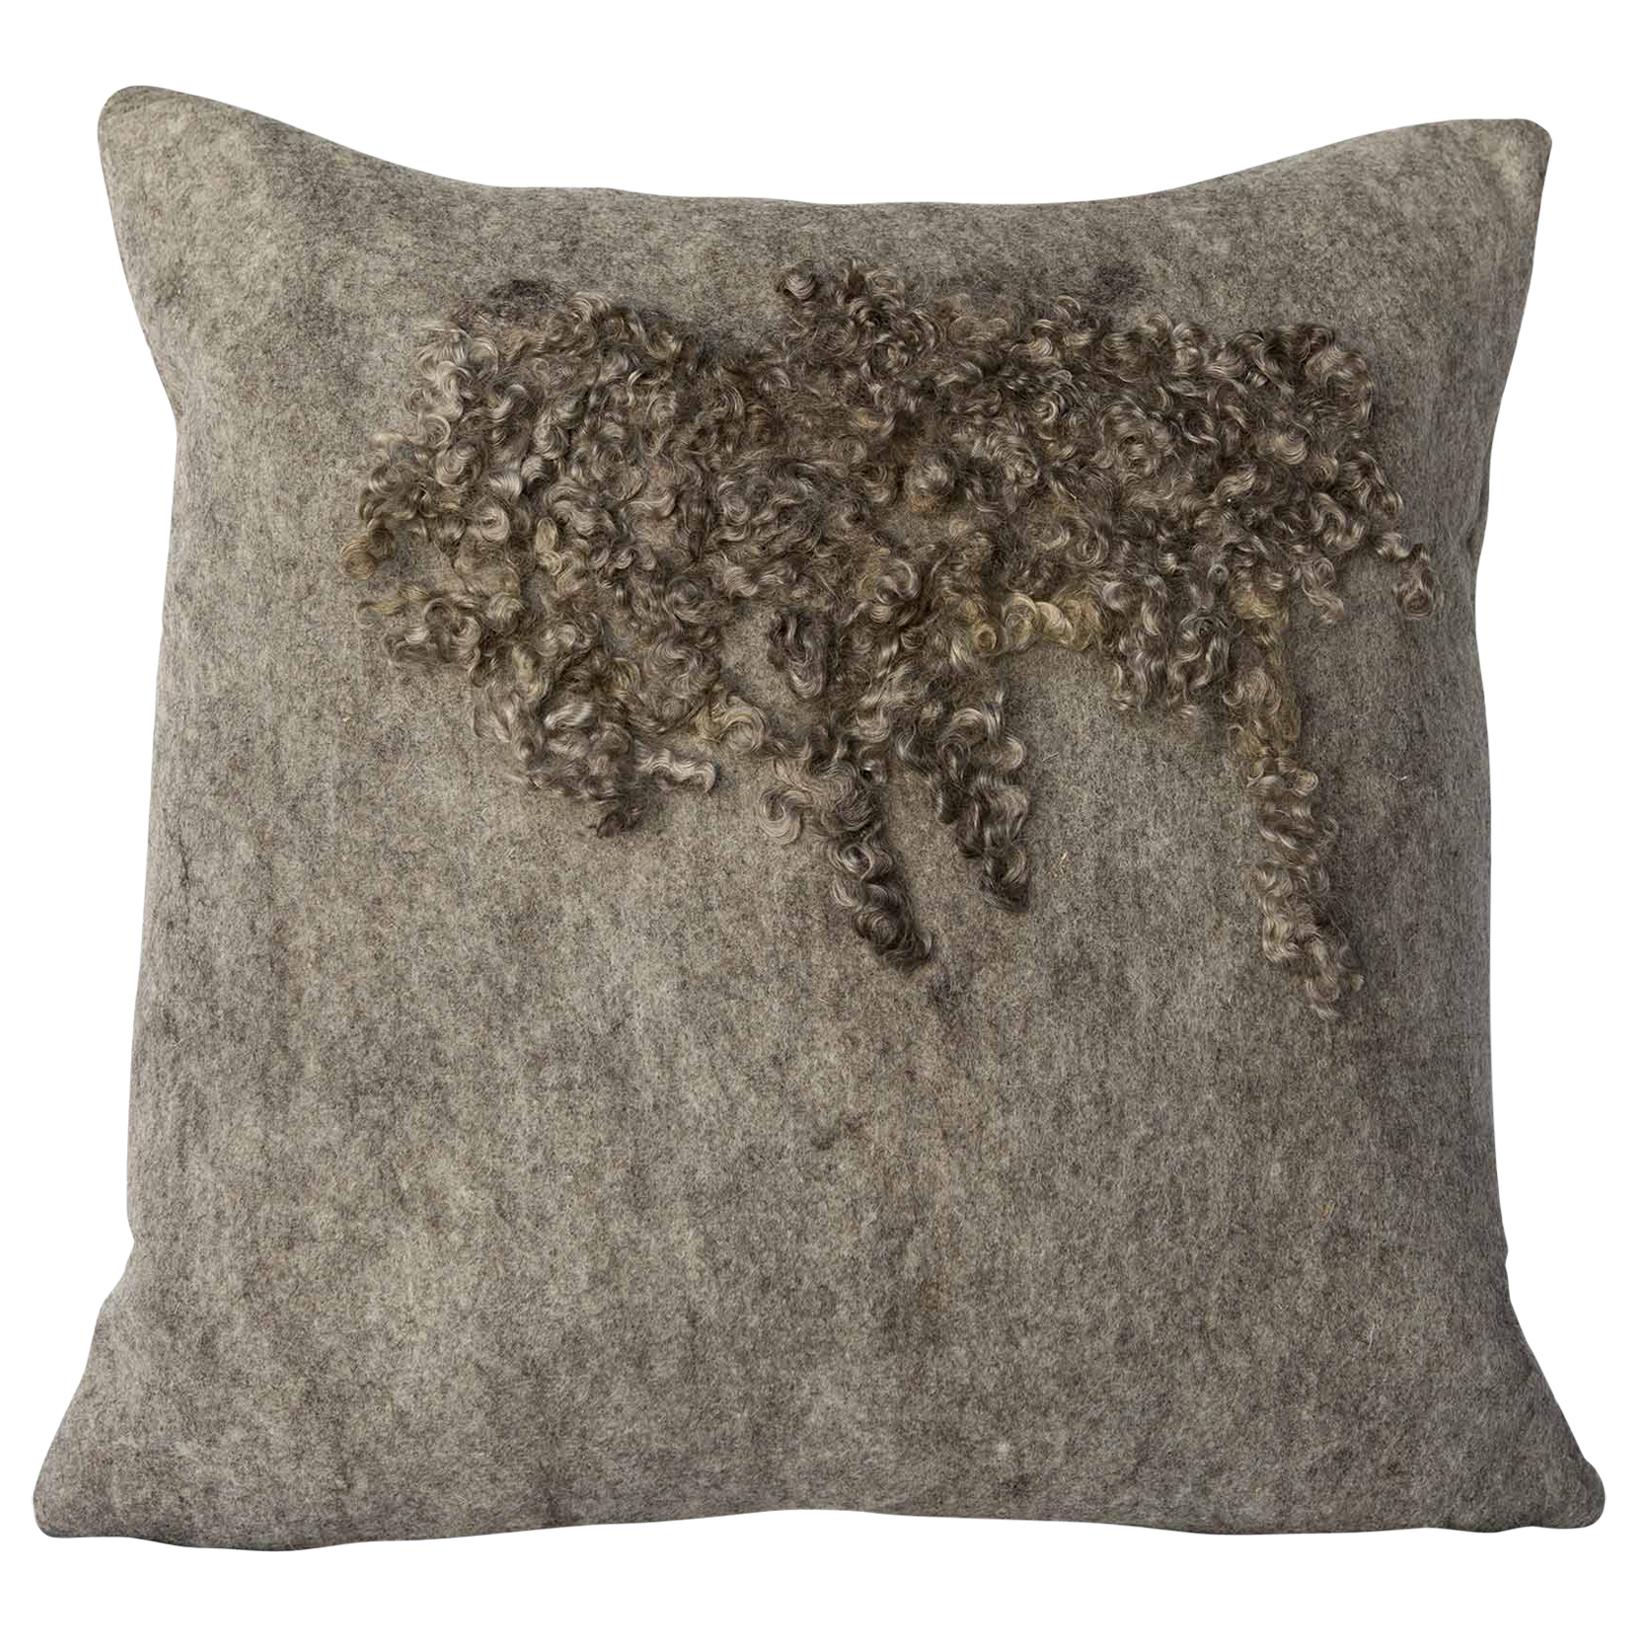 Wool Wensleydale Throw Pillow, Gray, Heritage Sheep Collection For Sale